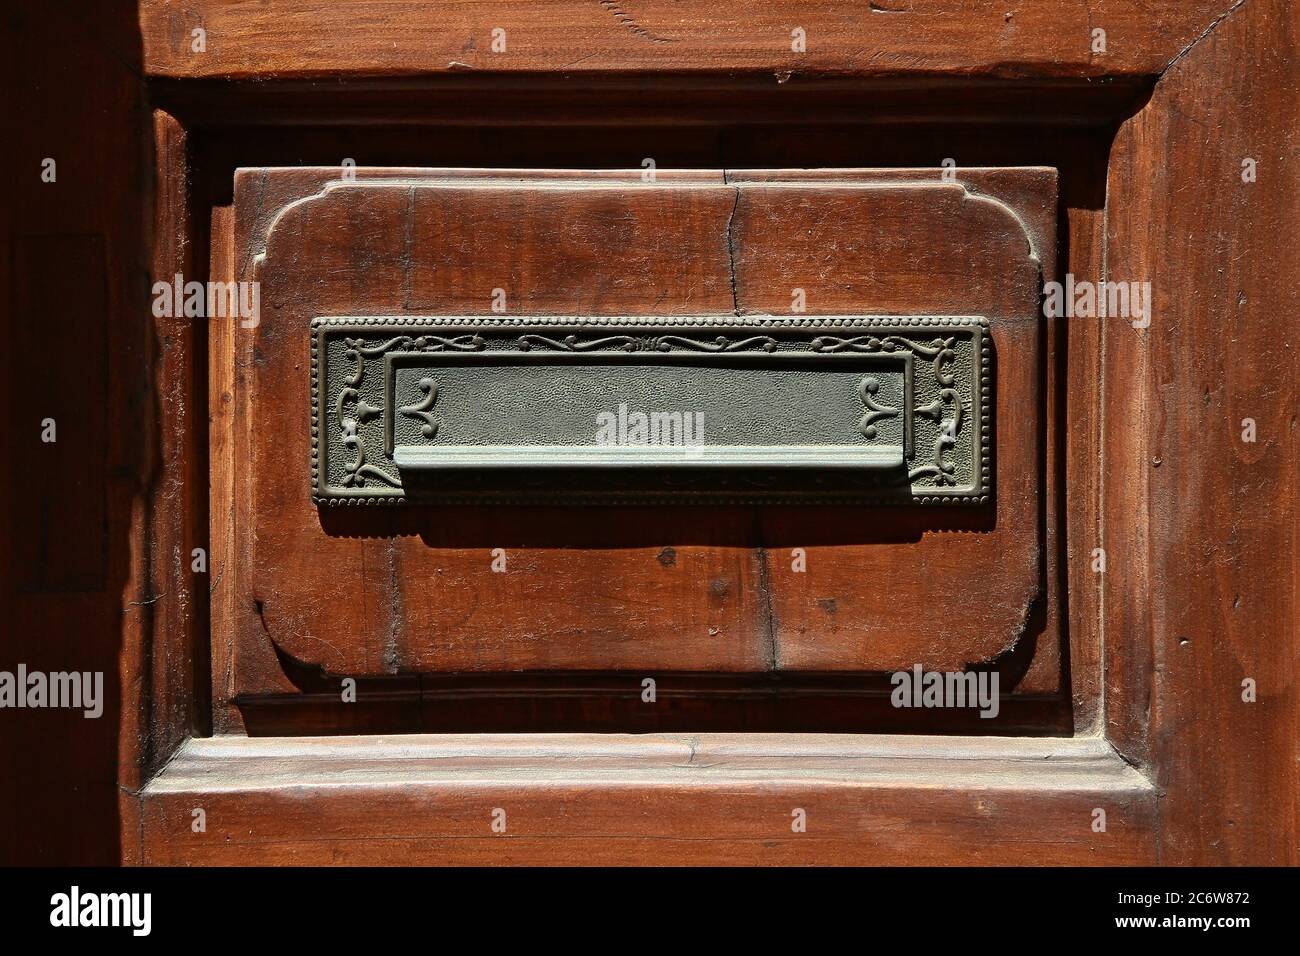 Decorative element. Vintage brass built-in mailbox decorated with embossed ornate scrolls . Volterra. Italy. Stock Photo